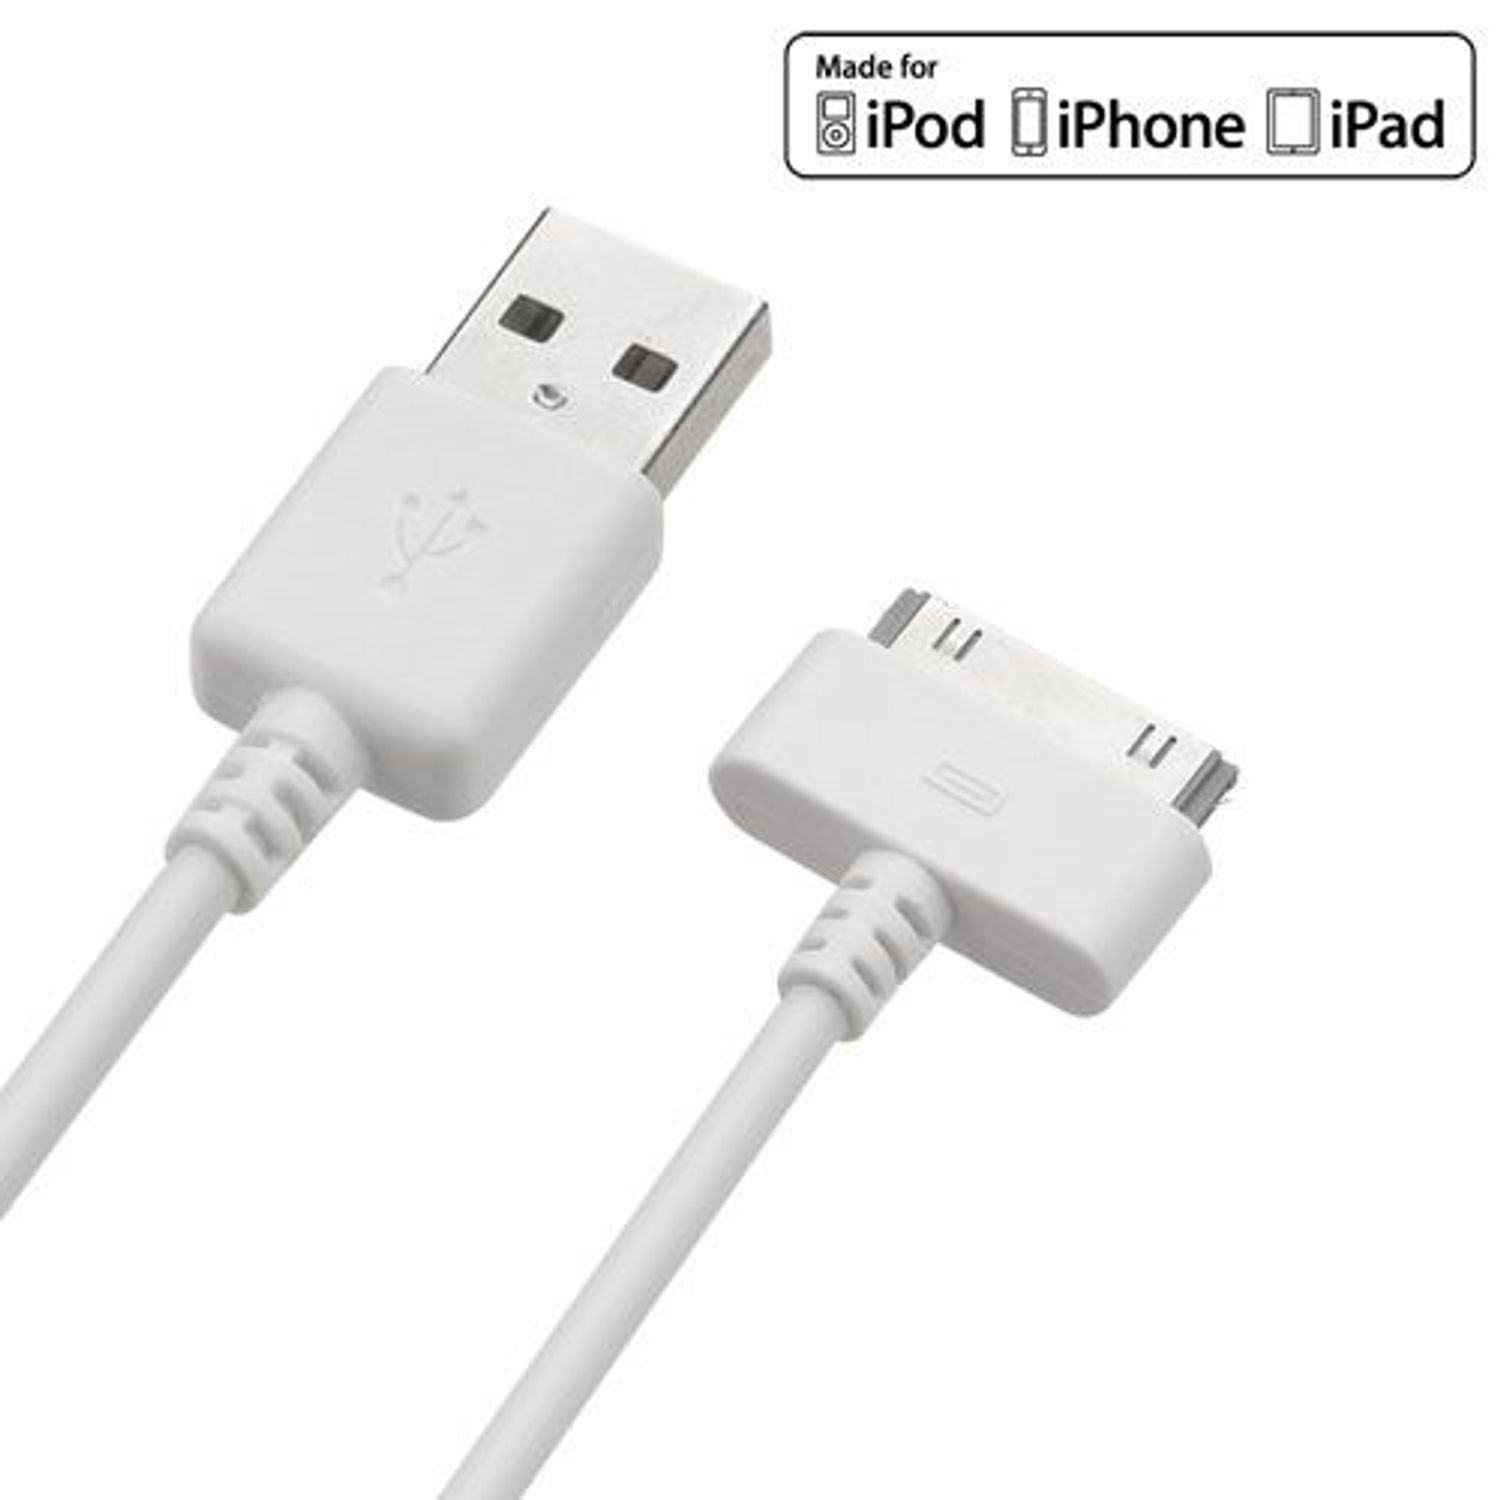 4 6FT USB SYNC DATA POWER CHARGER ORANGE CABLE IPHONE 4S IPOD TOUCH CLASSIC IPAD 